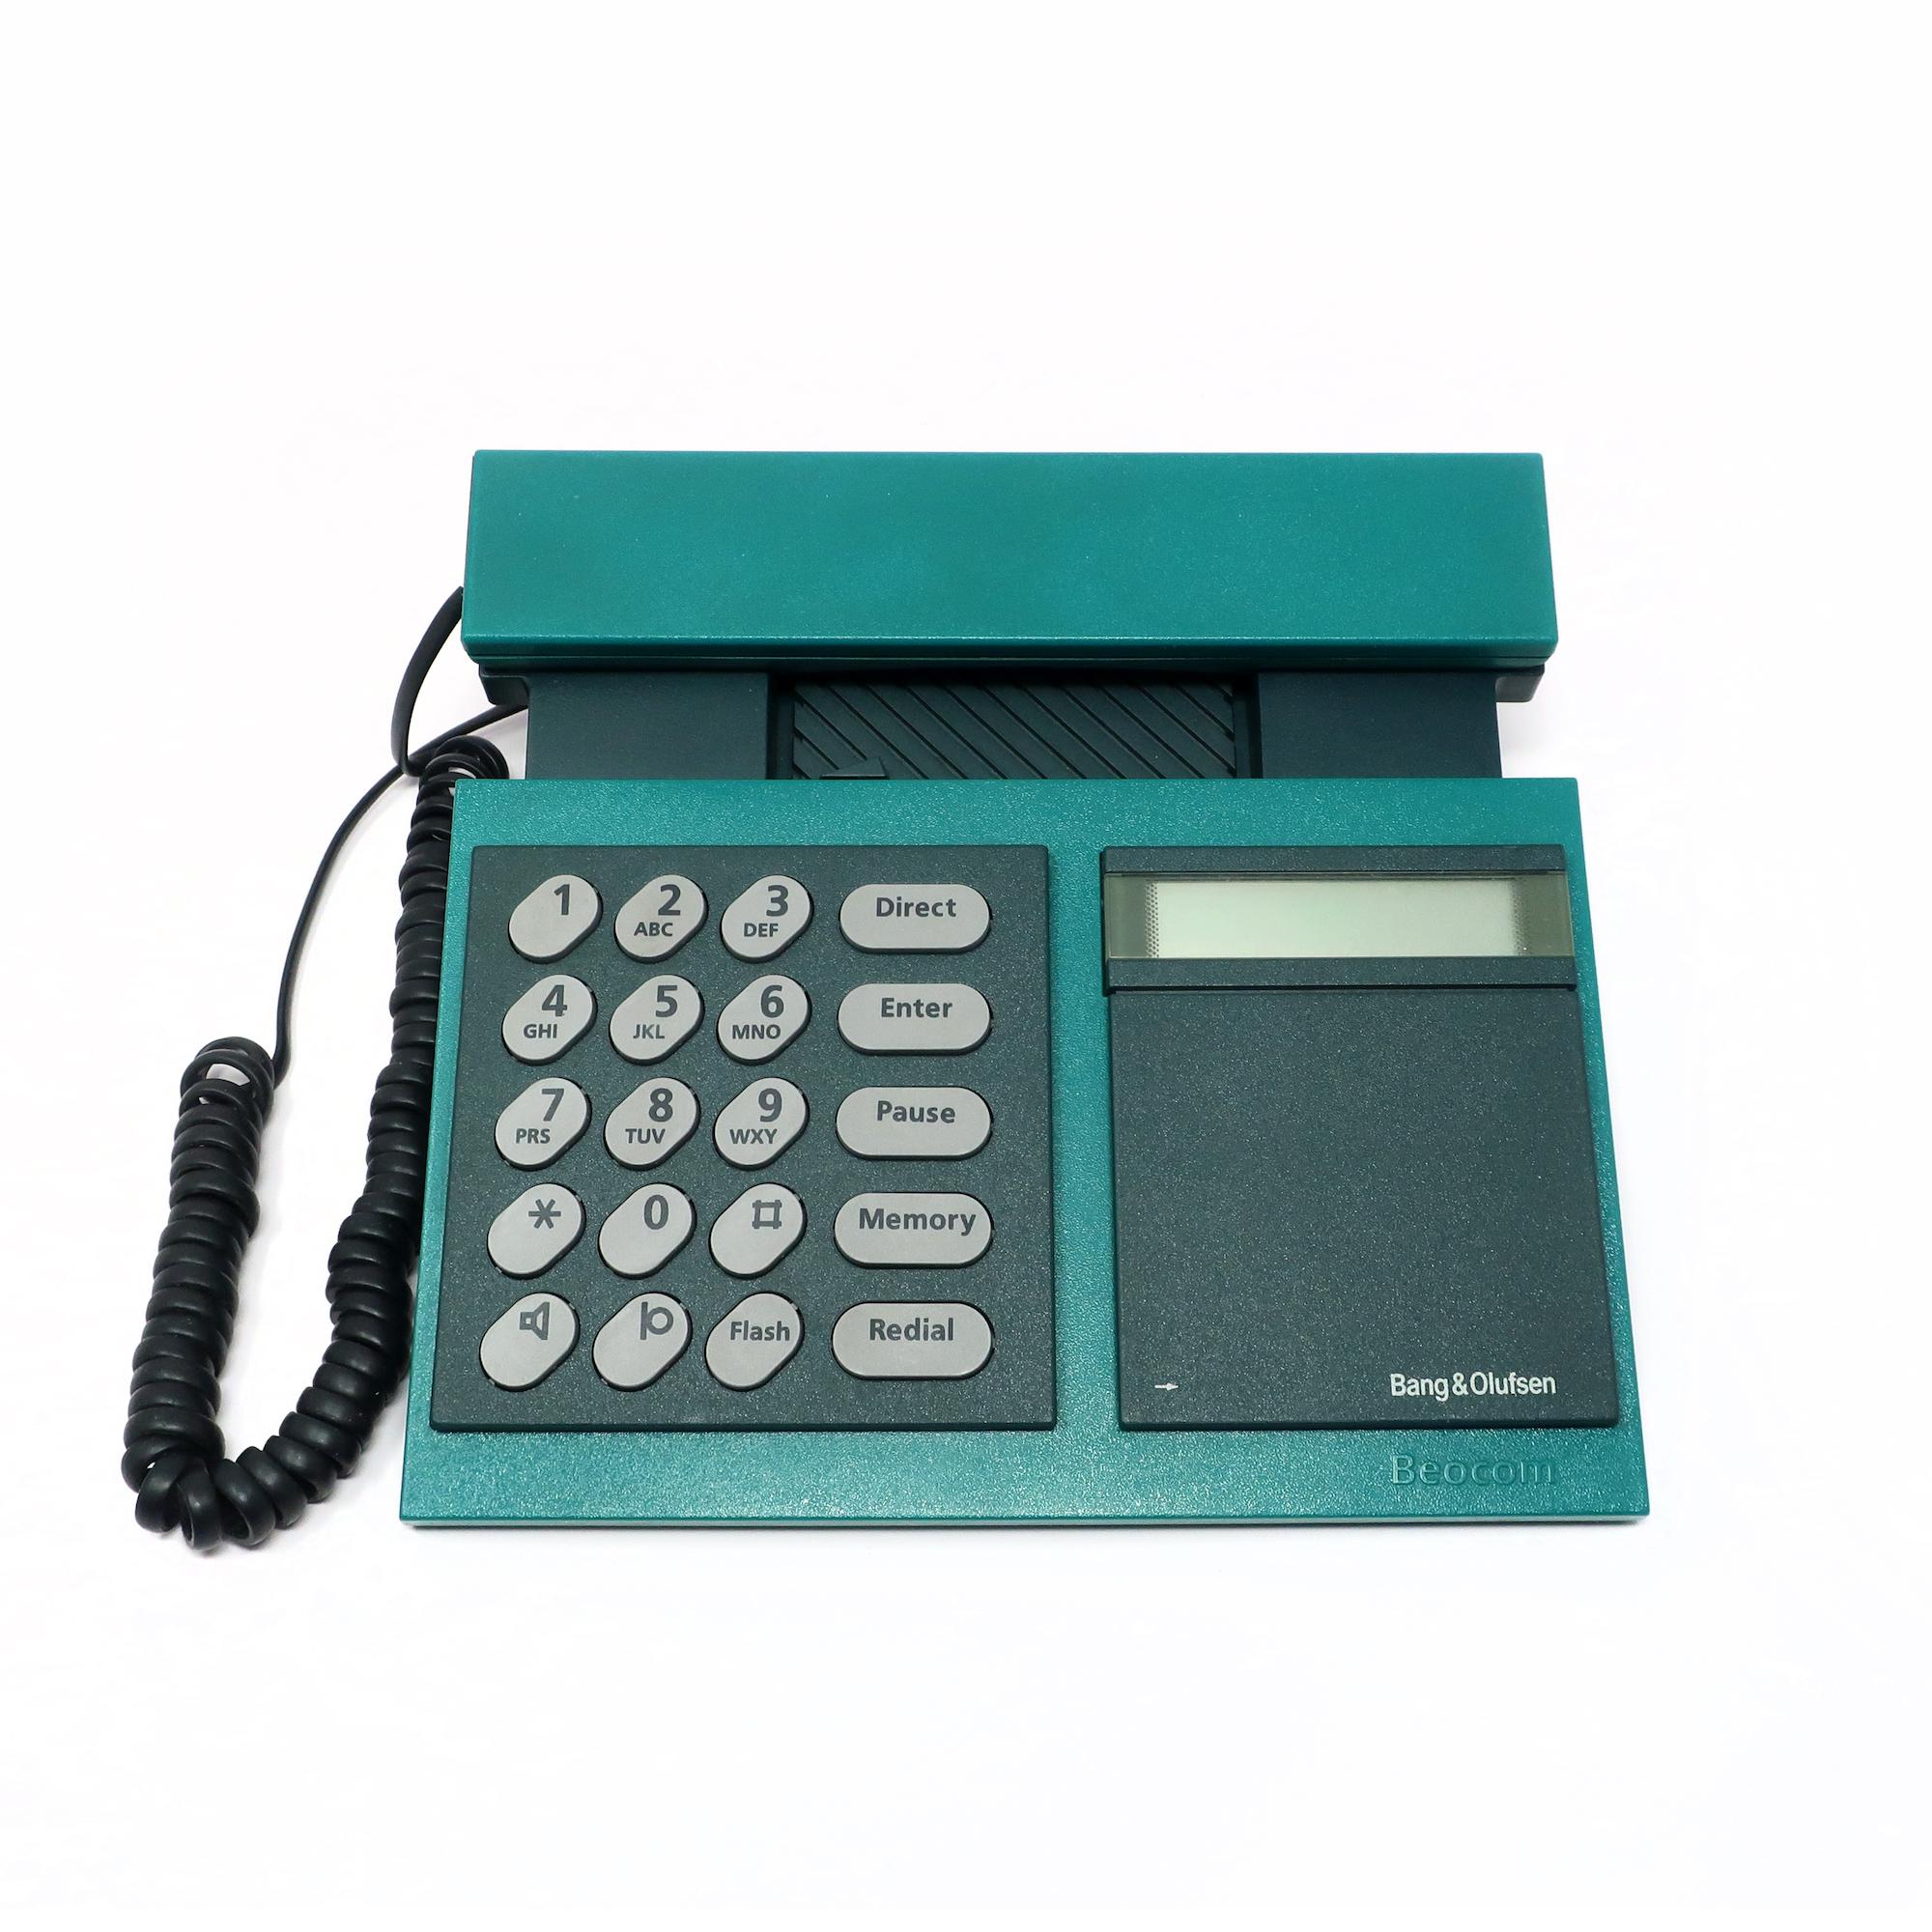 Designed in 1986 Lone and Gideon Lindinger-Lowy, the Bang & Olufsen Beocom 2000 telephone is Danish design at its finest, and the epitome of 1980s high-tech and high design. It has a green handset and body and gray buttons.

In good vintage